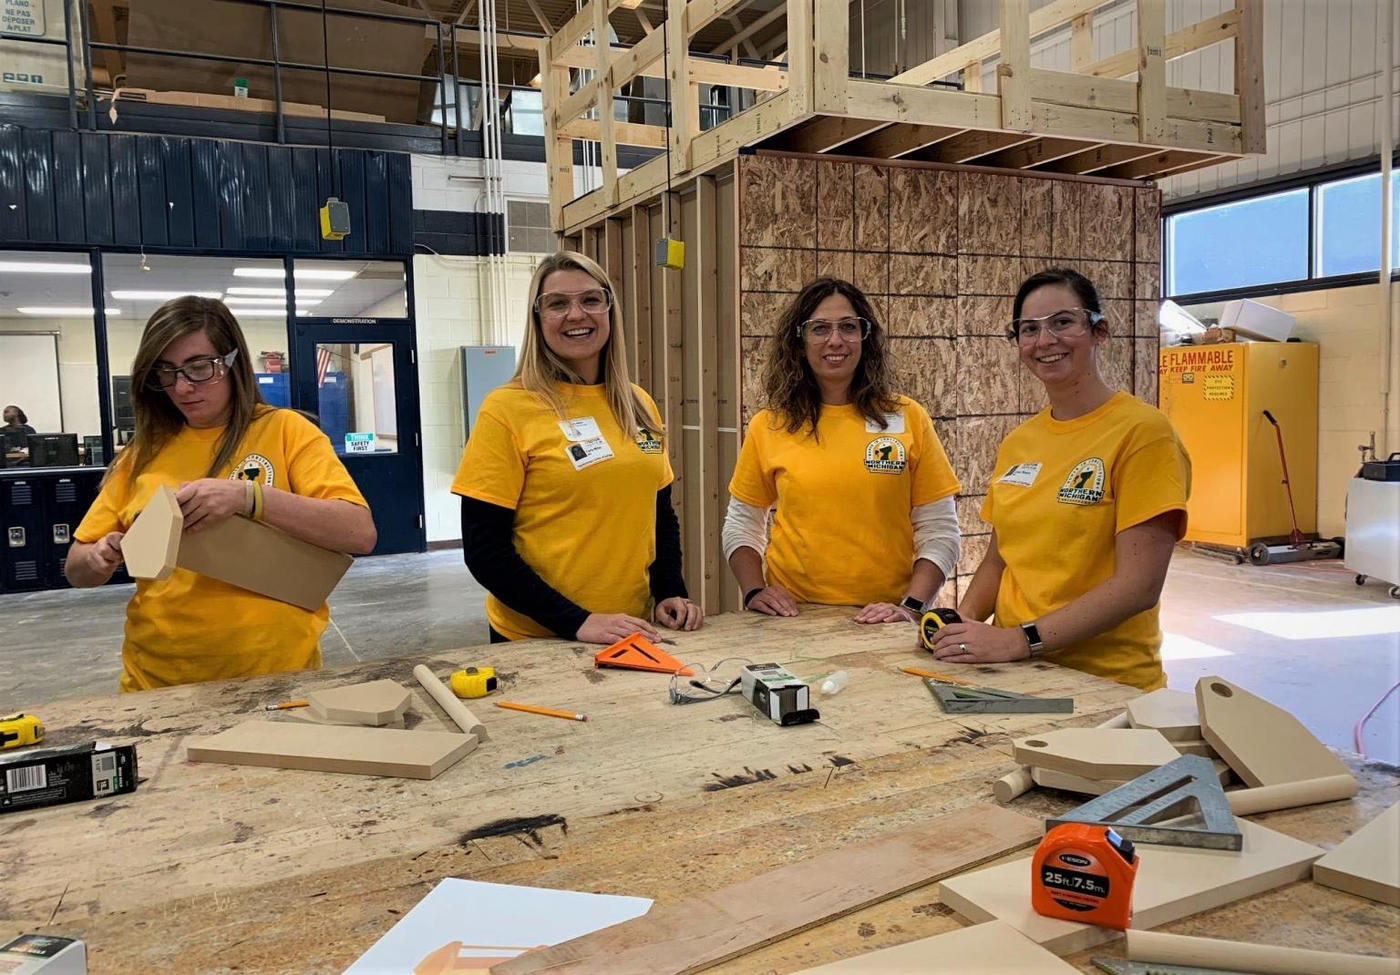 Keller employees at a Women in Construction event